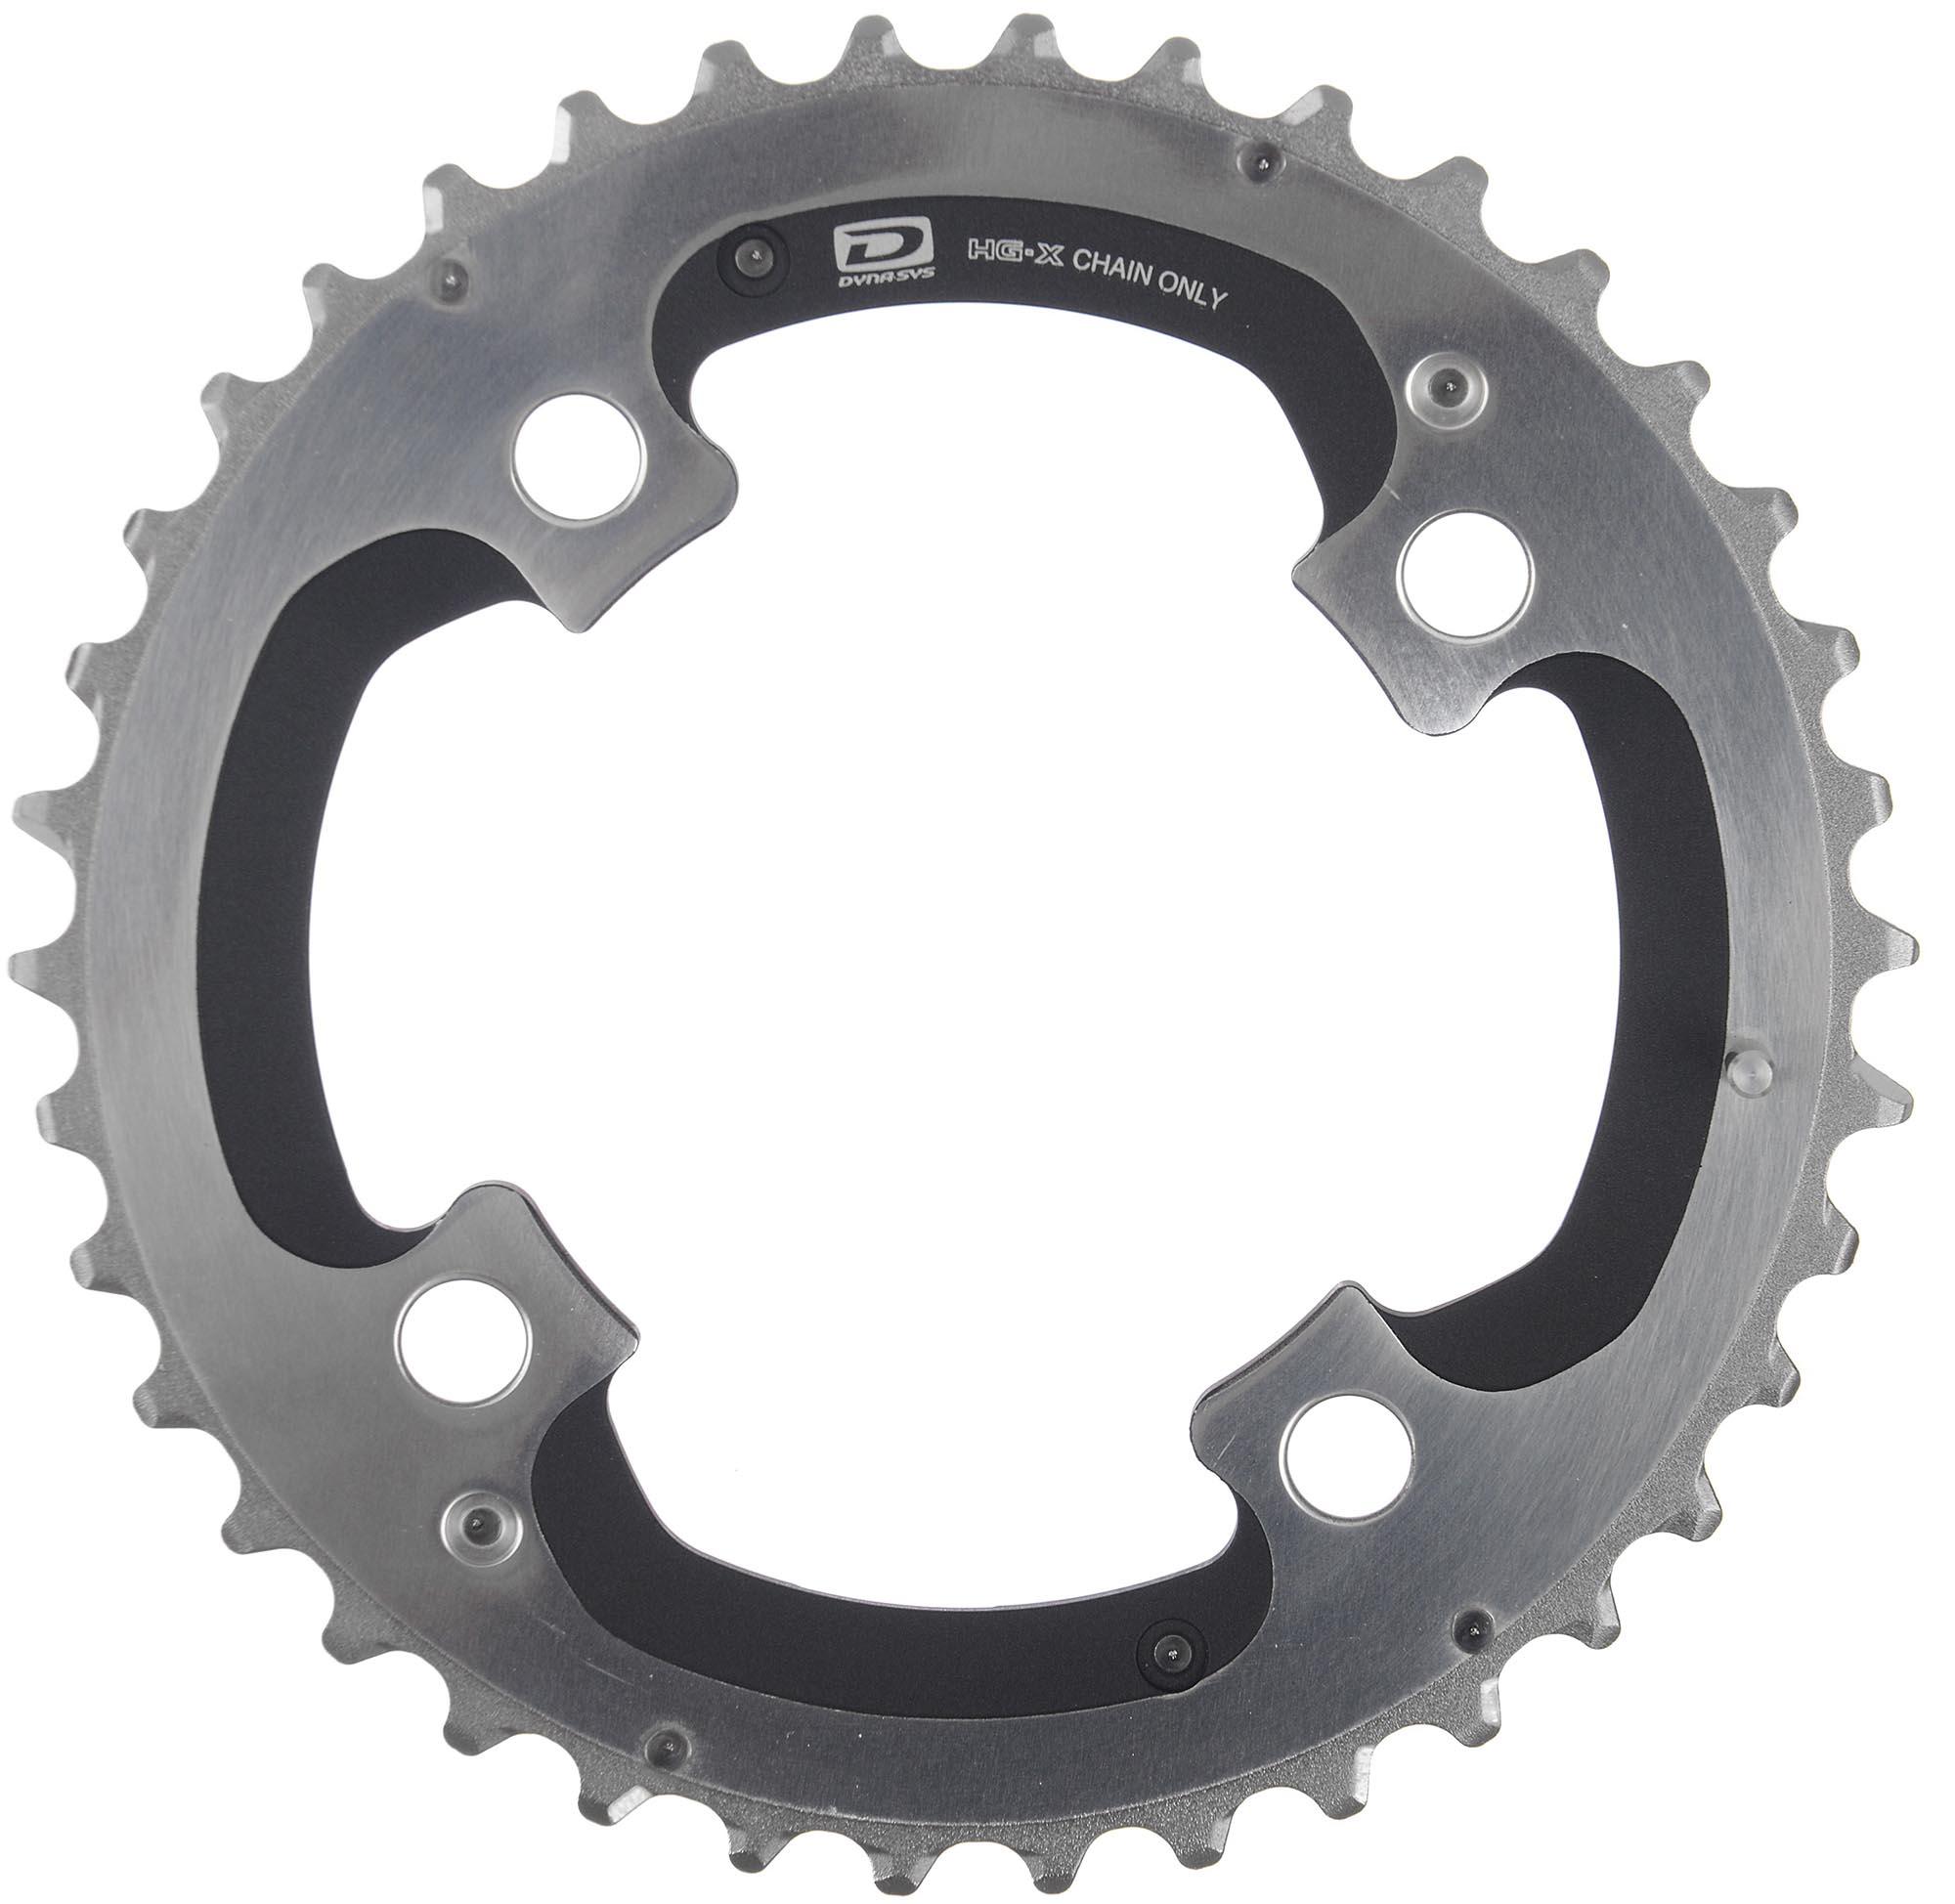 Shimano Xtr Fcm980 10 Speed Double Chainrings - Silver